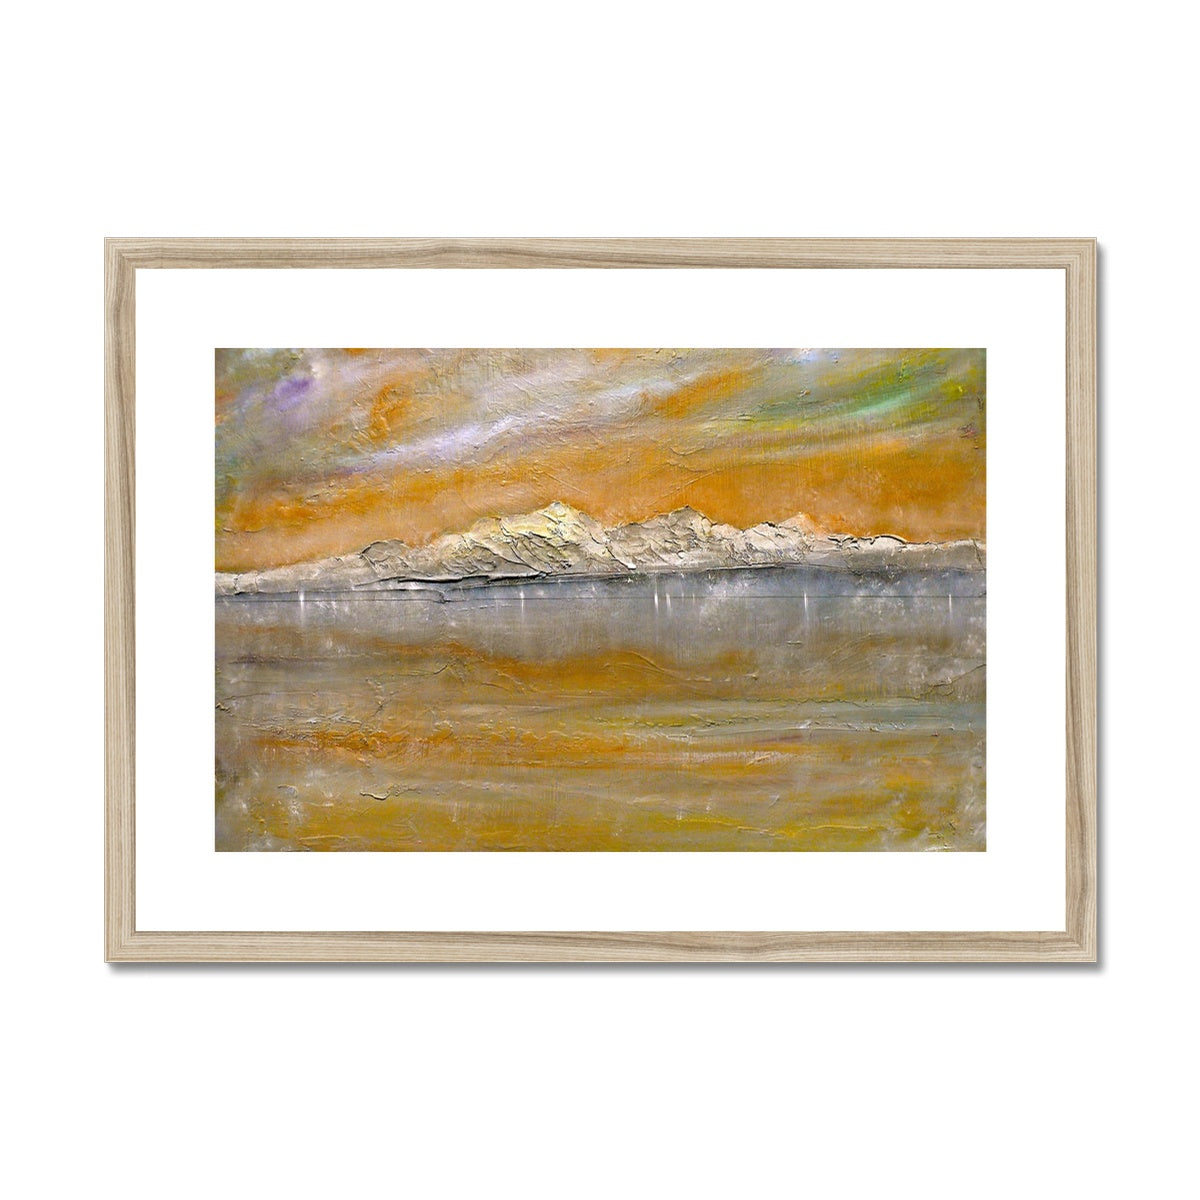 Arran Snow Painting | Framed & Mounted Prints From Scotland-Framed & Mounted Prints-Arran Art Gallery-A2 Landscape-Natural Frame-Paintings, Prints, Homeware, Art Gifts From Scotland By Scottish Artist Kevin Hunter